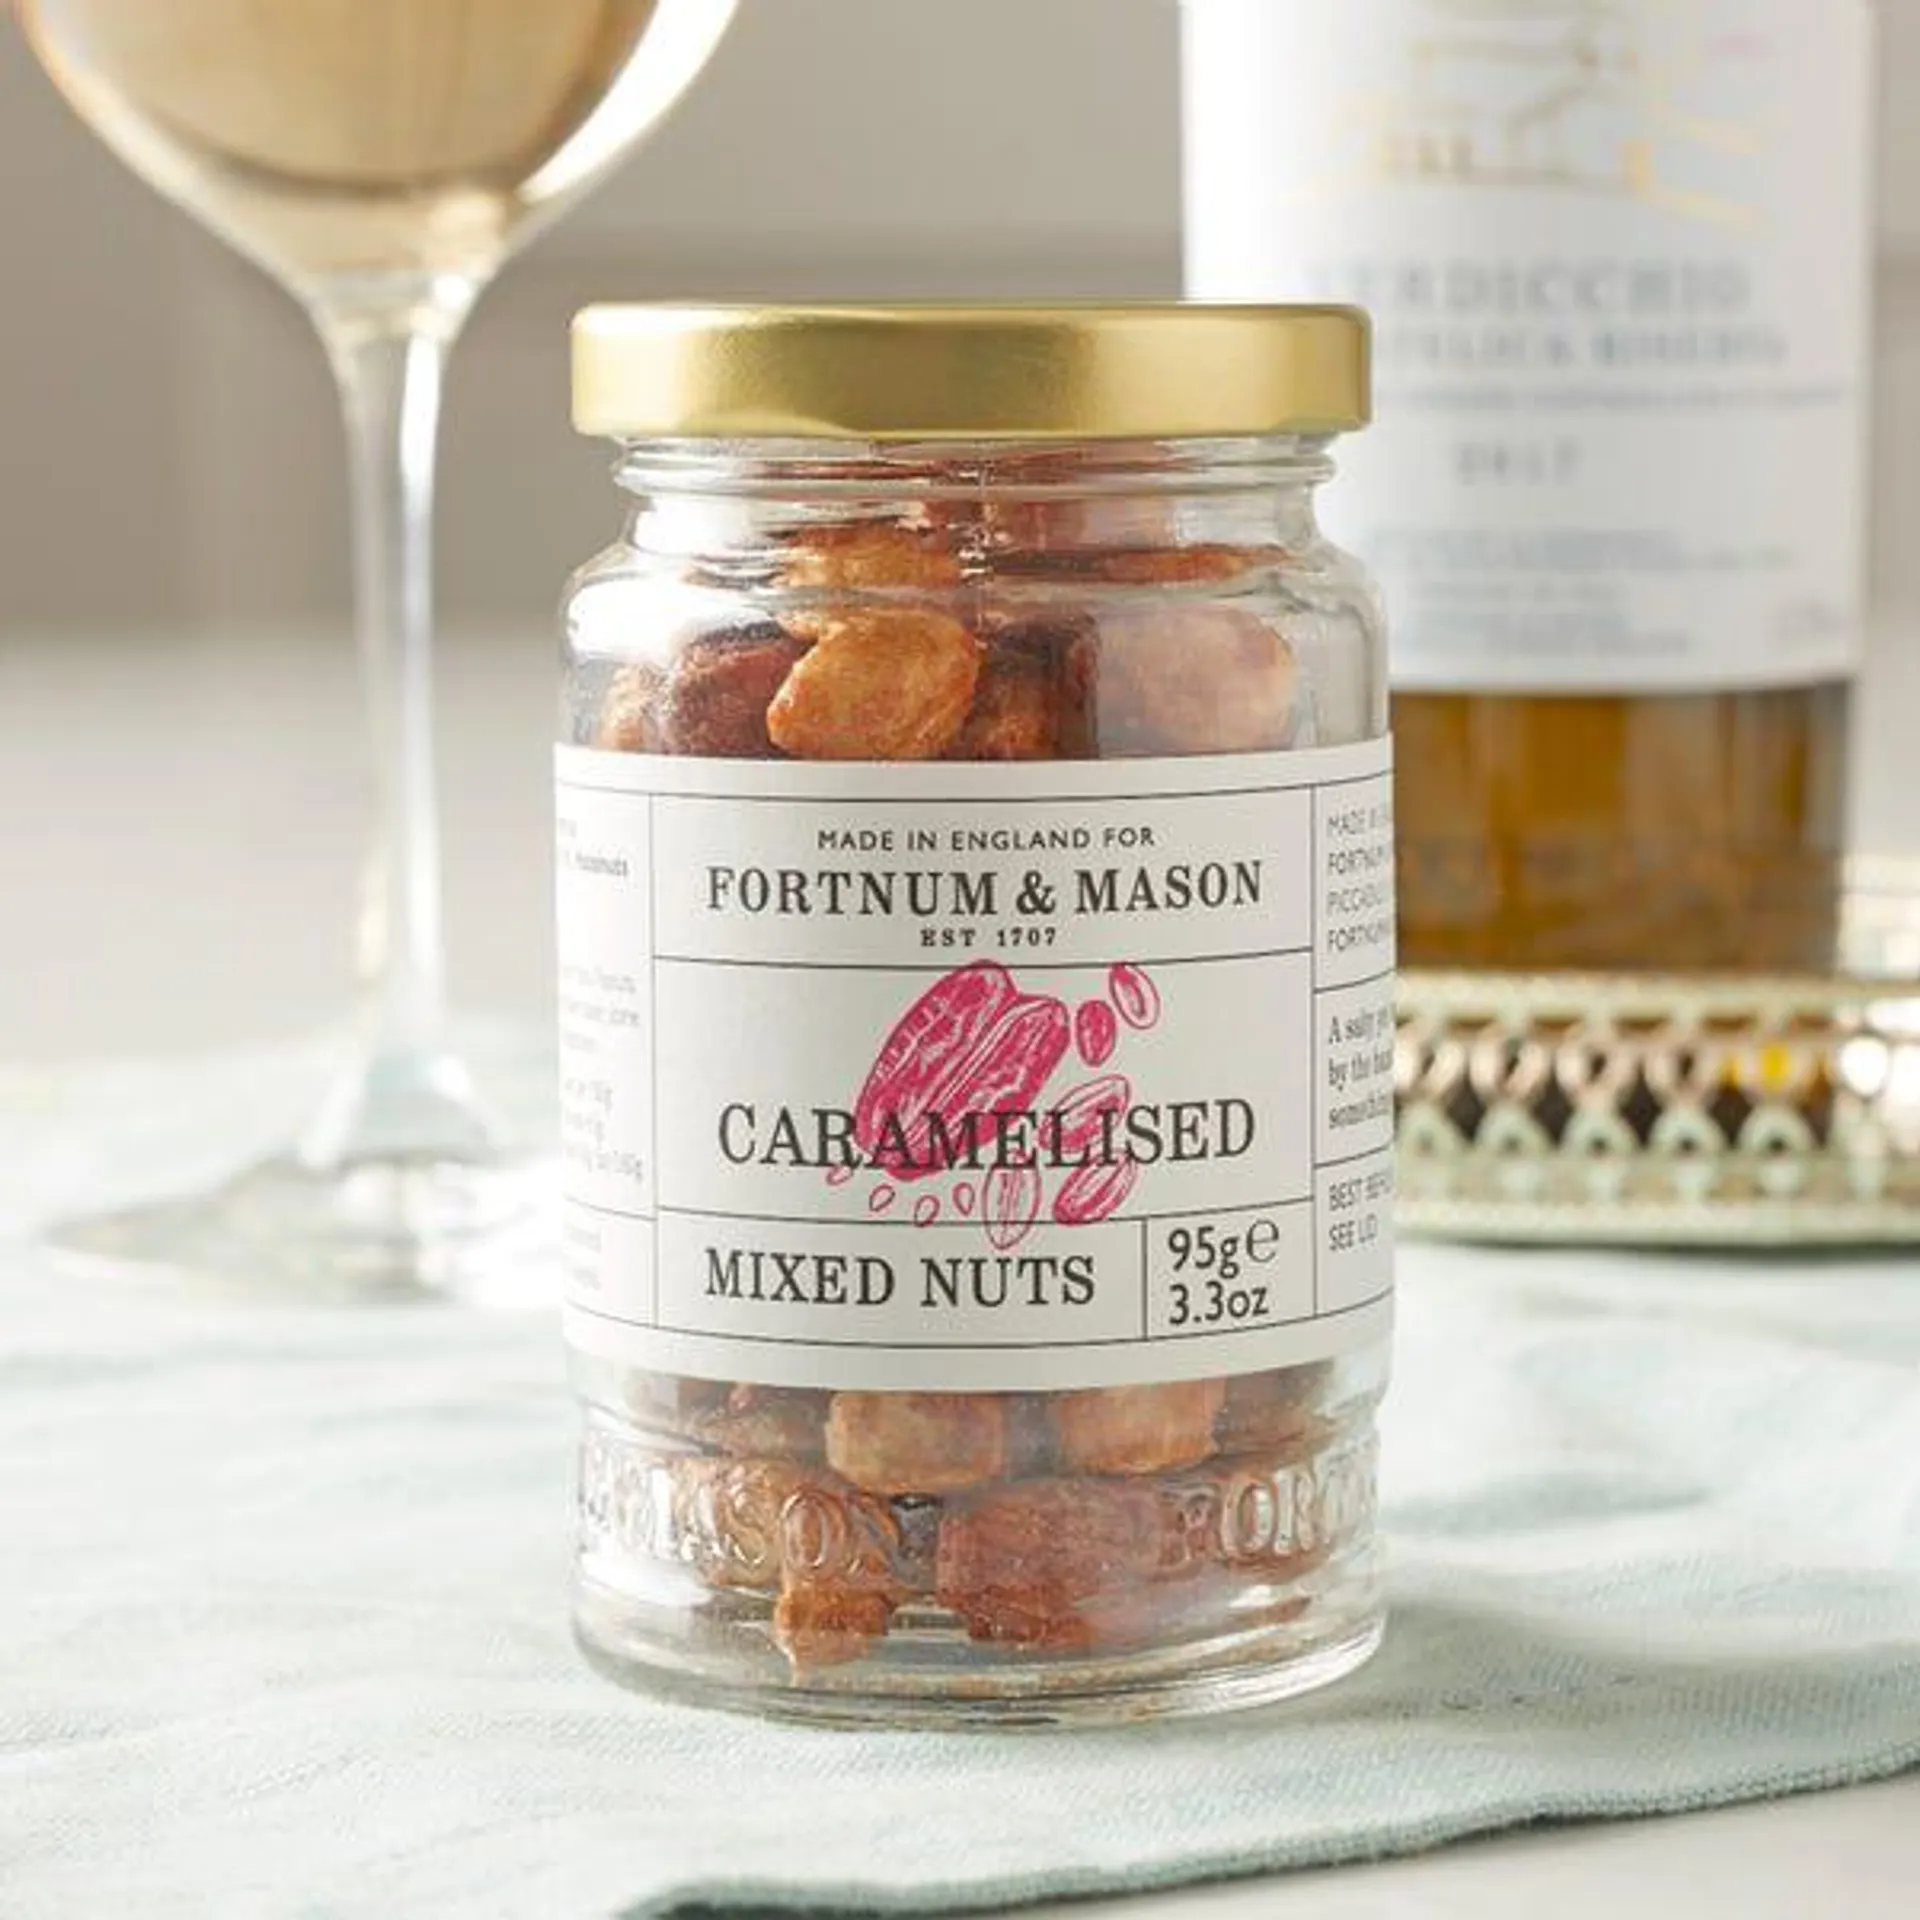 Caramelised Mixed Nuts, 95g